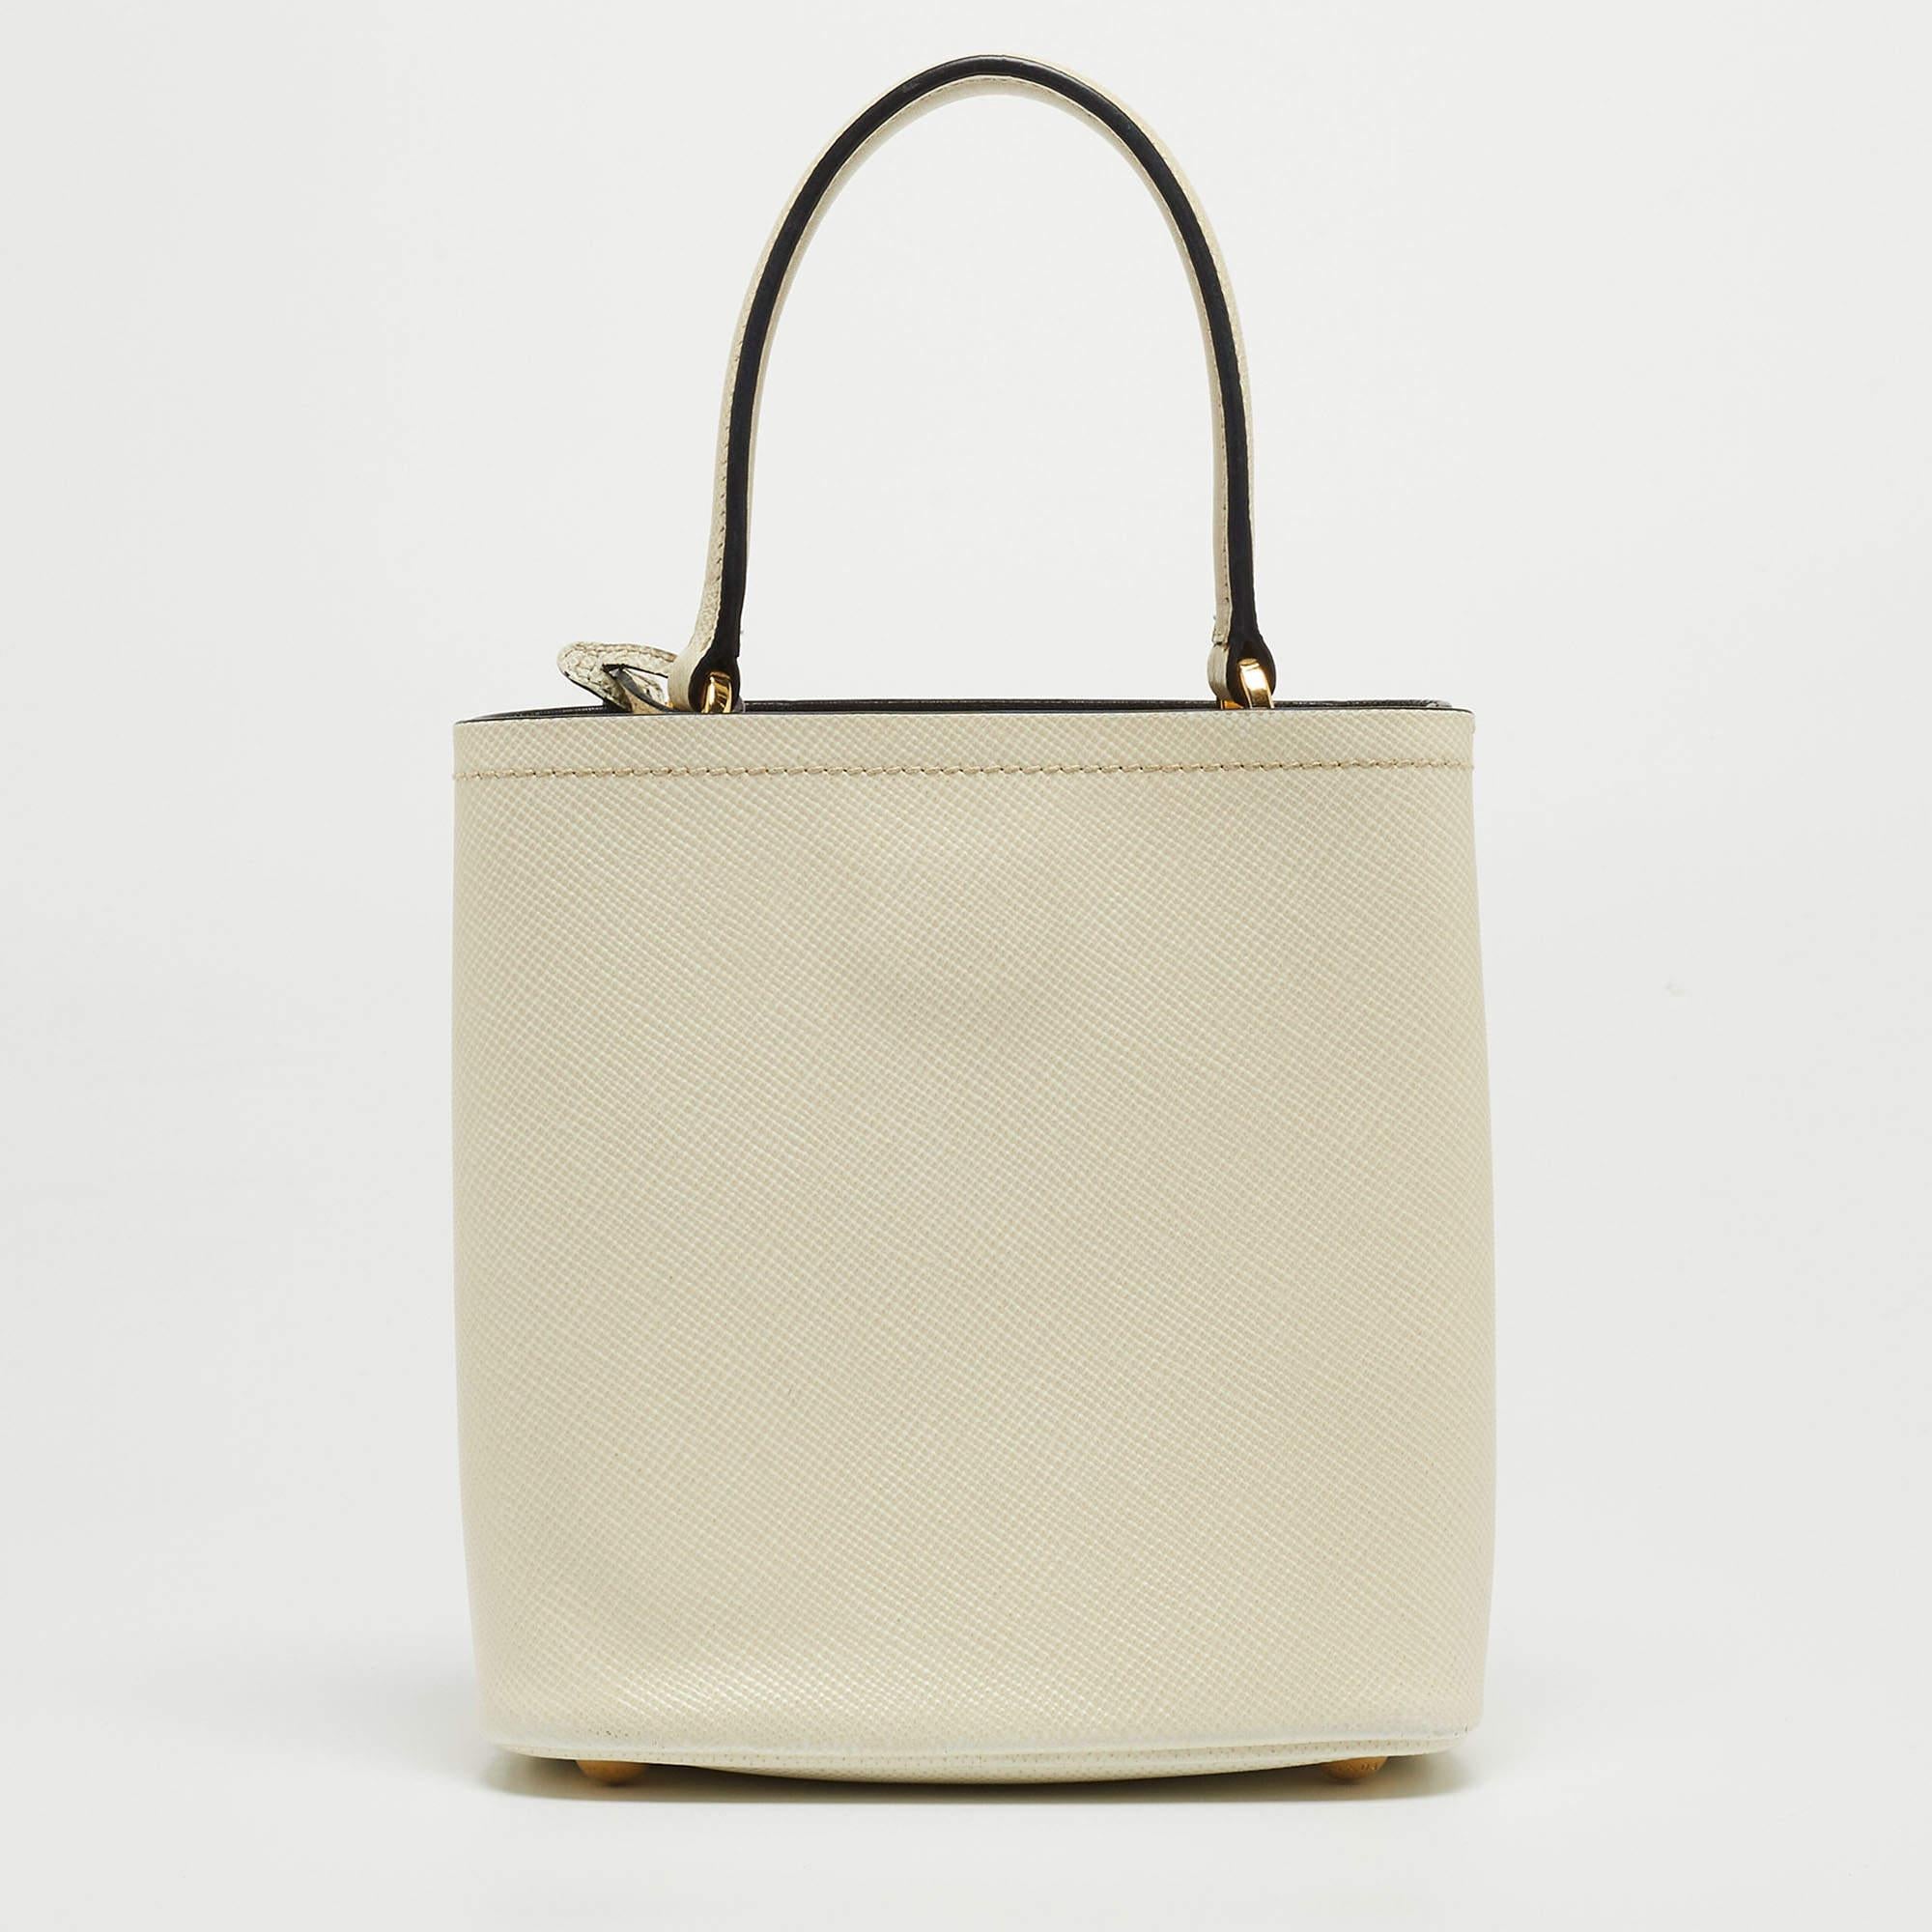 Prada's signature trait of luxury and class is displayed in this bag from the Panier collection. It is a top-handle leather bag that comes with a detachable strap and has the brand's logo fitted on the front in gold-tone metal. This cream-hued bag